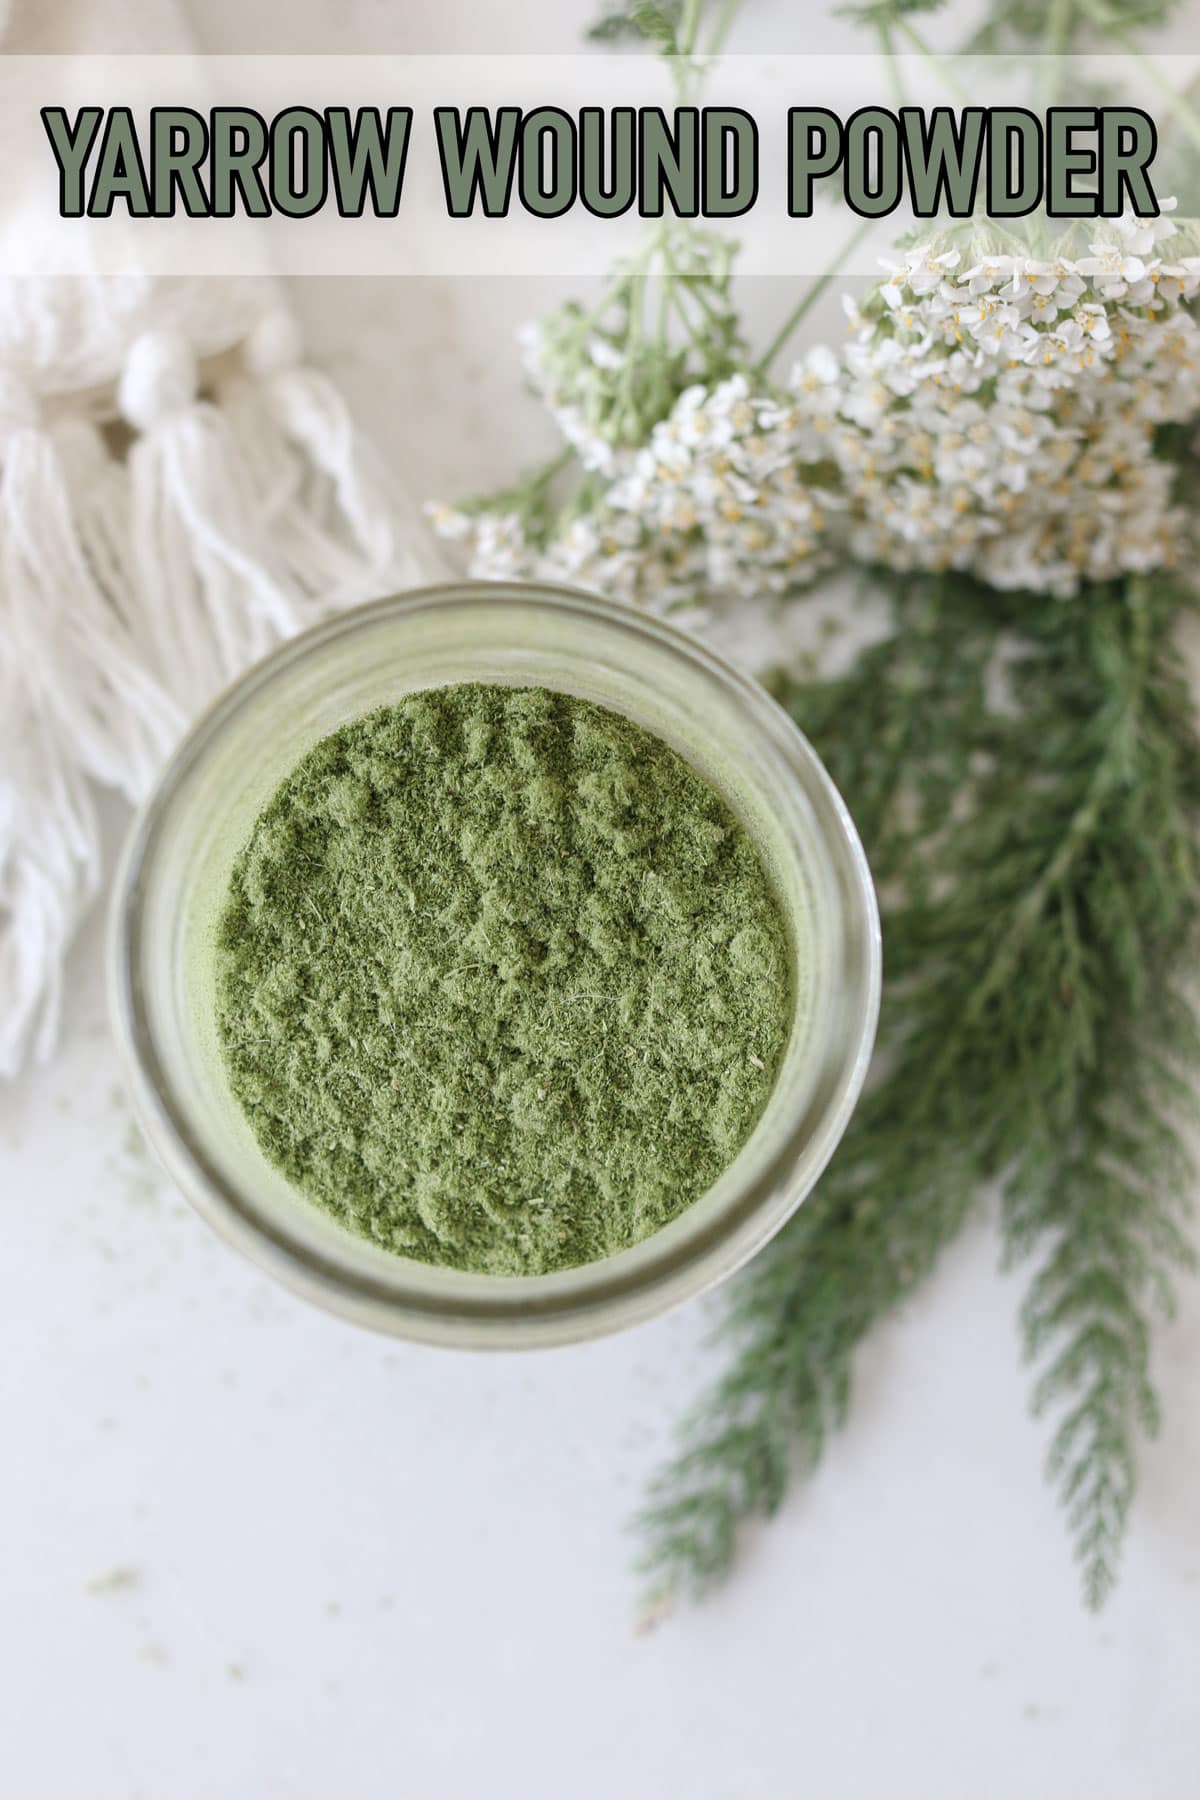 A jar of green yarrow wound powder with leaves and flowers